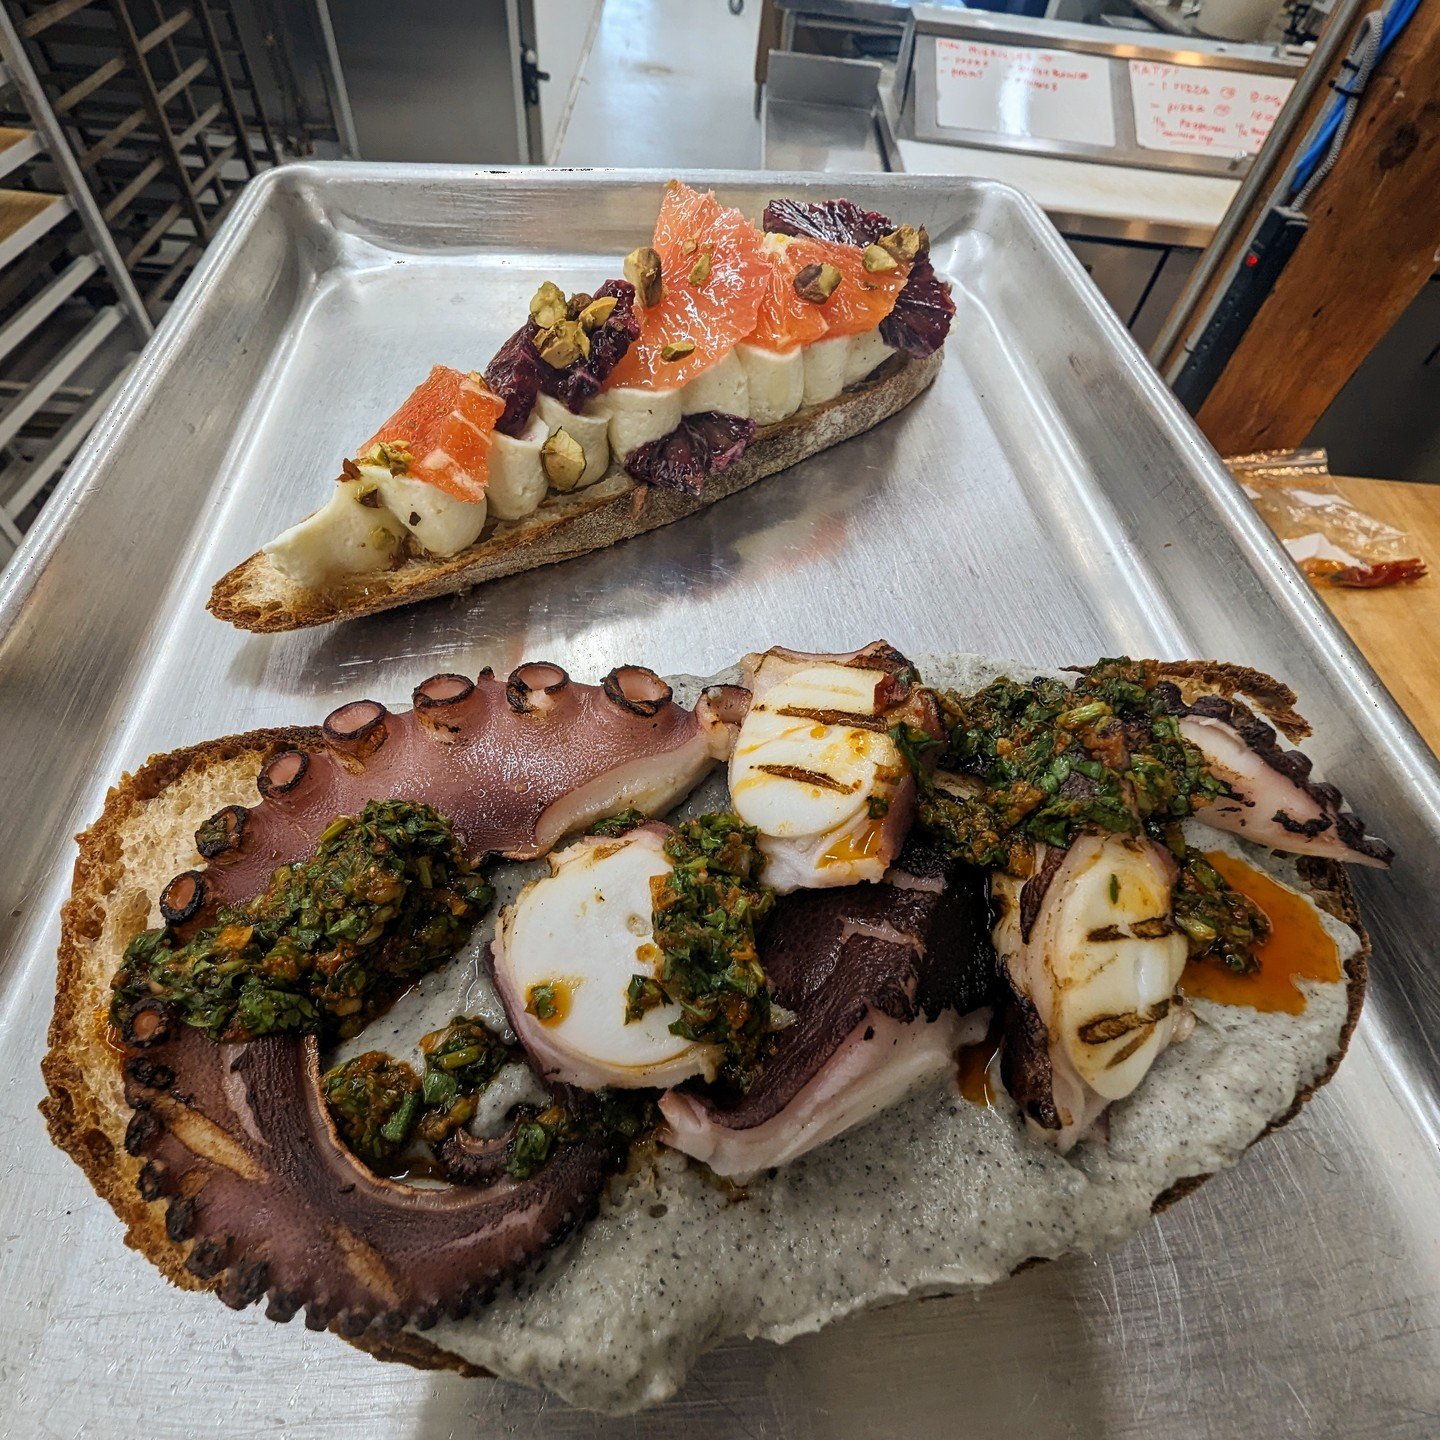 @thegrumpypelican Citrus and Honey ricotta tartine on our Baguette up top. Below you have the Charred Octopus with black sesame &amp; cauliflower tahini on Coastside sourdough. Both will be available on Saturday evening 4/27 from 5pm-8pm.